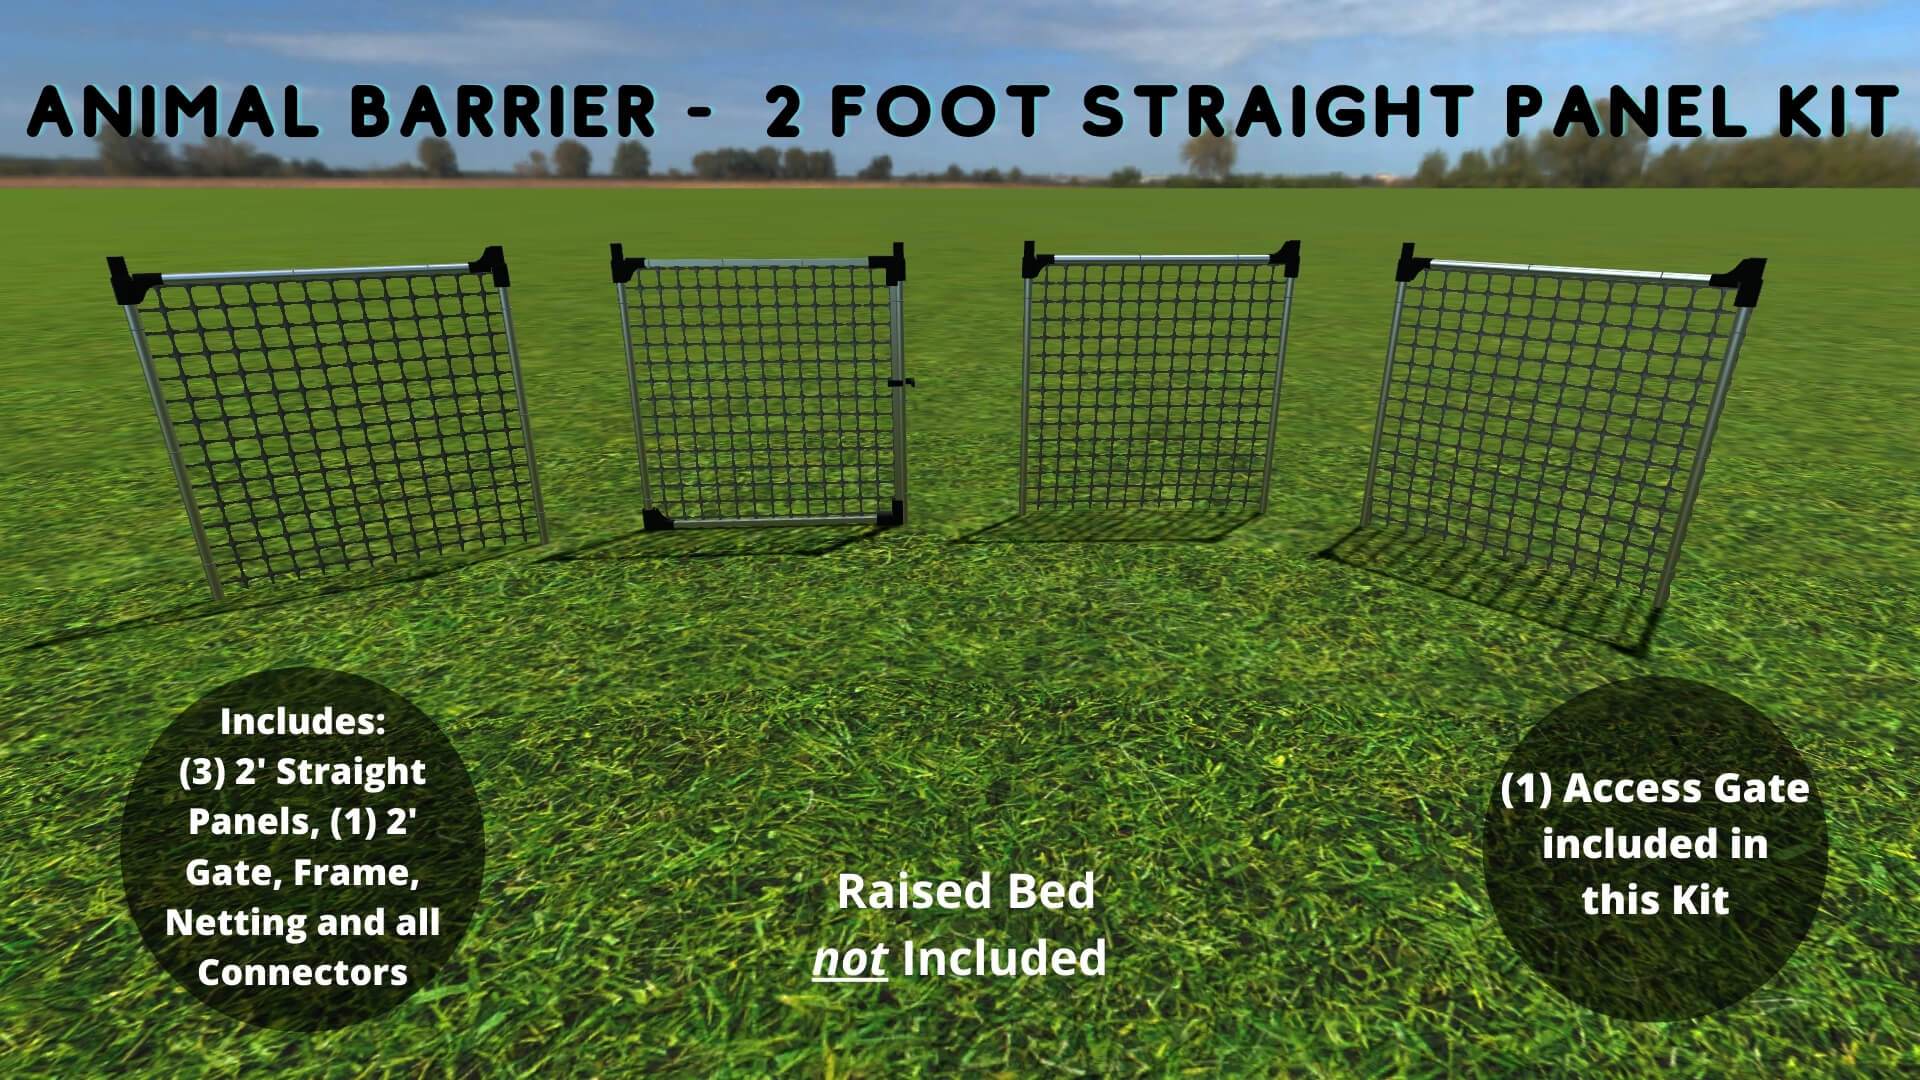 Stack & Extend 'Animal Barrier' with Gate - 2 Foot Wide Straight Panels